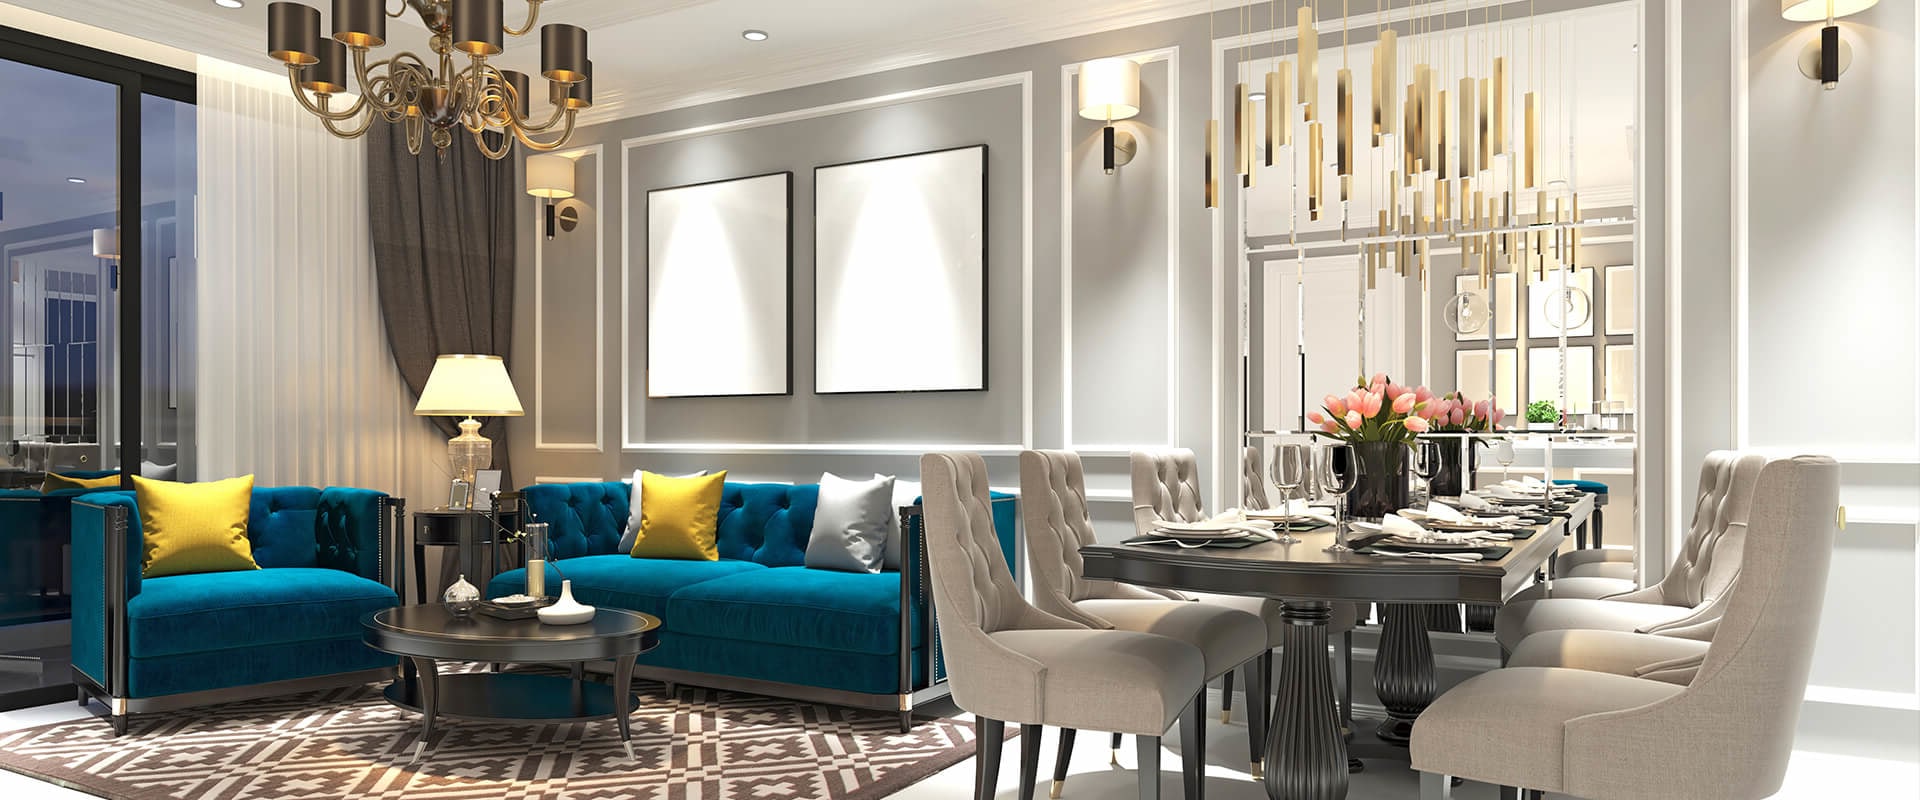 Luxury Furniture: Investing in Timeless Elegance or Opting for Contemporary Chic